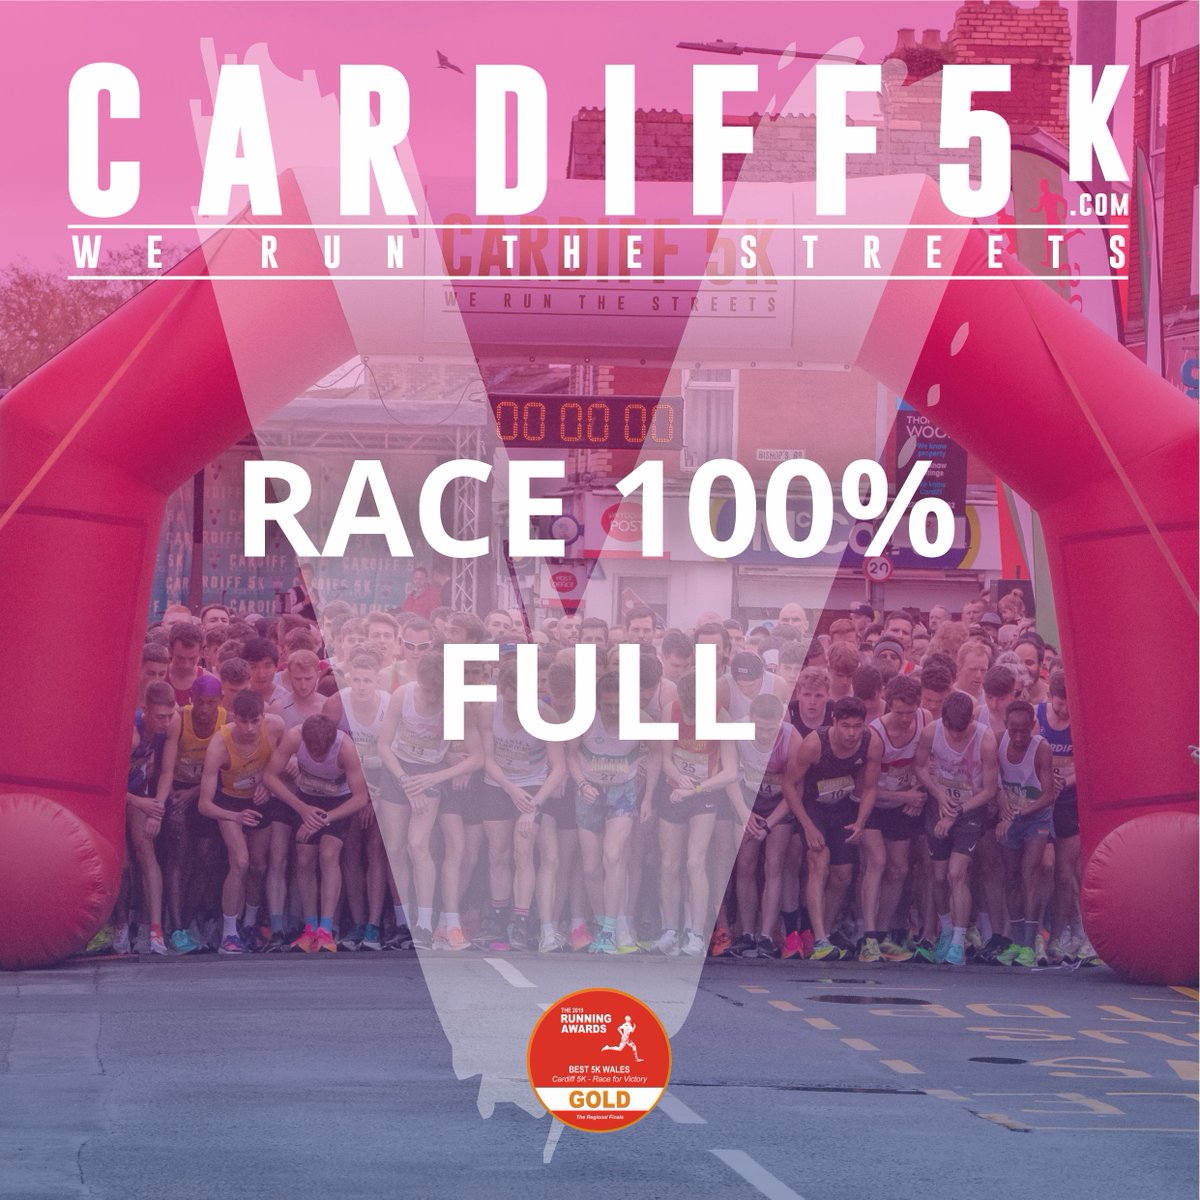 2024 @Cardiff5K - Race For Victory 🏴󠁧󠁢󠁷󠁬󠁳󠁿 is NOW 100% FULL 🏁Thank You for your MASSIVE support ❤️ We have opened a waiting list should any extra places become available Cardiff5K.com #best5k @CardiffTimes @EventsNWales @AllWalesSport @My_Cardiff @Sportin_Wales @Dai_Sport_